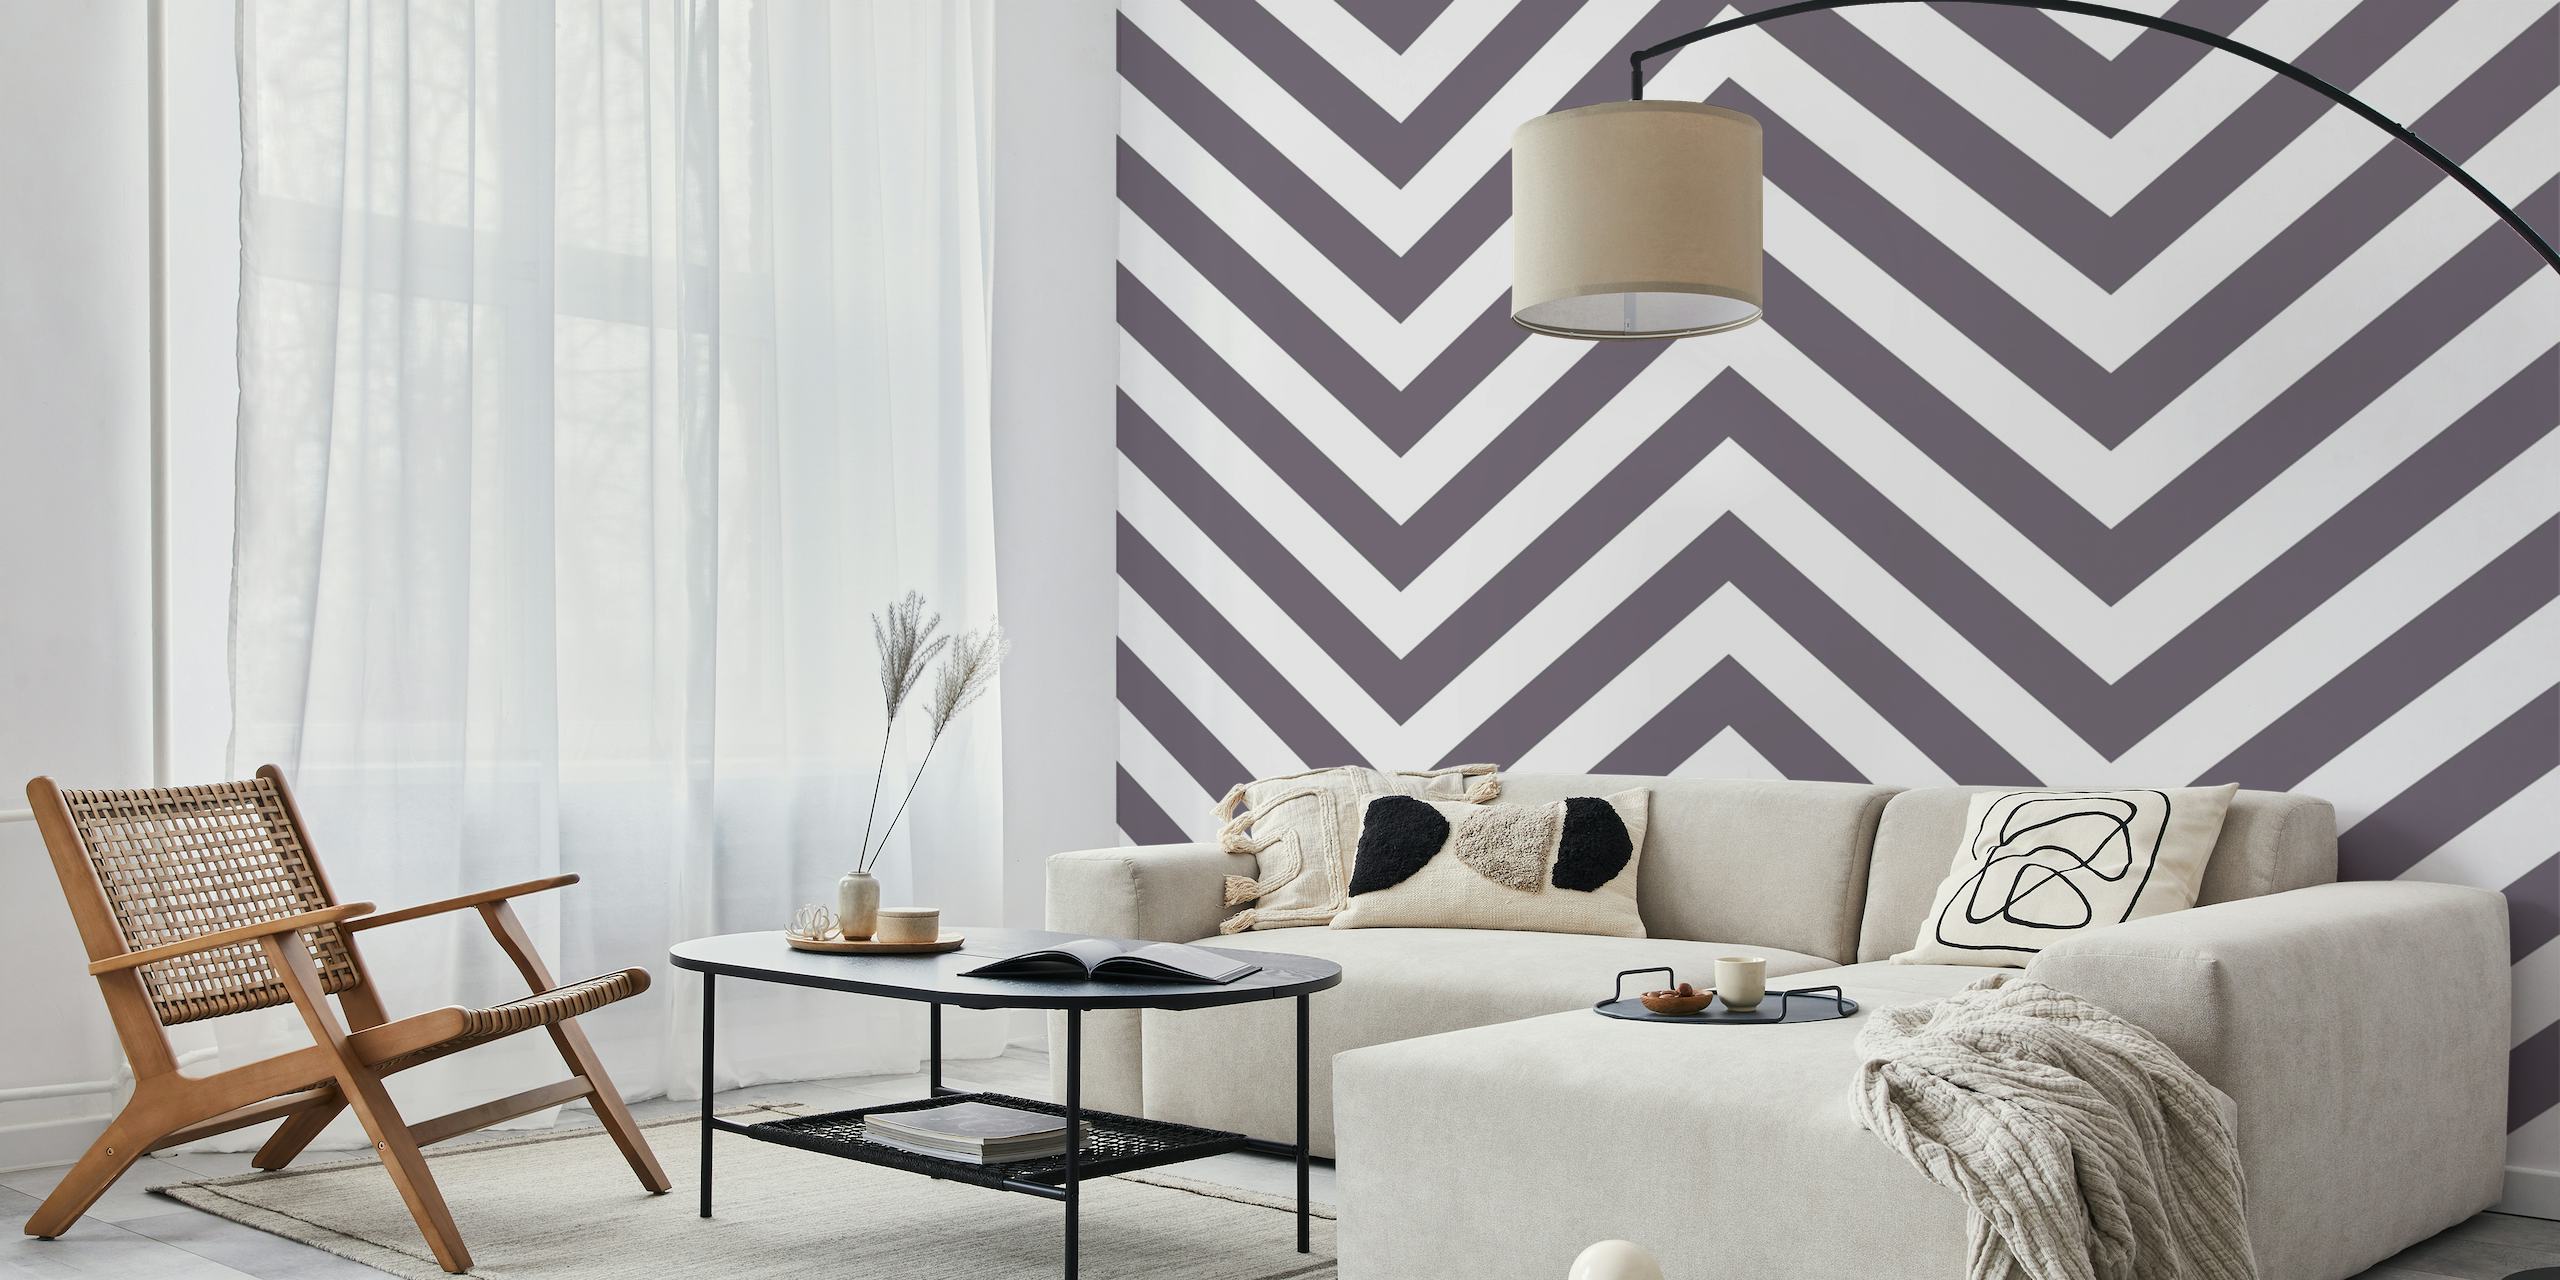 Chevron brown and white zigzag pattern wall mural